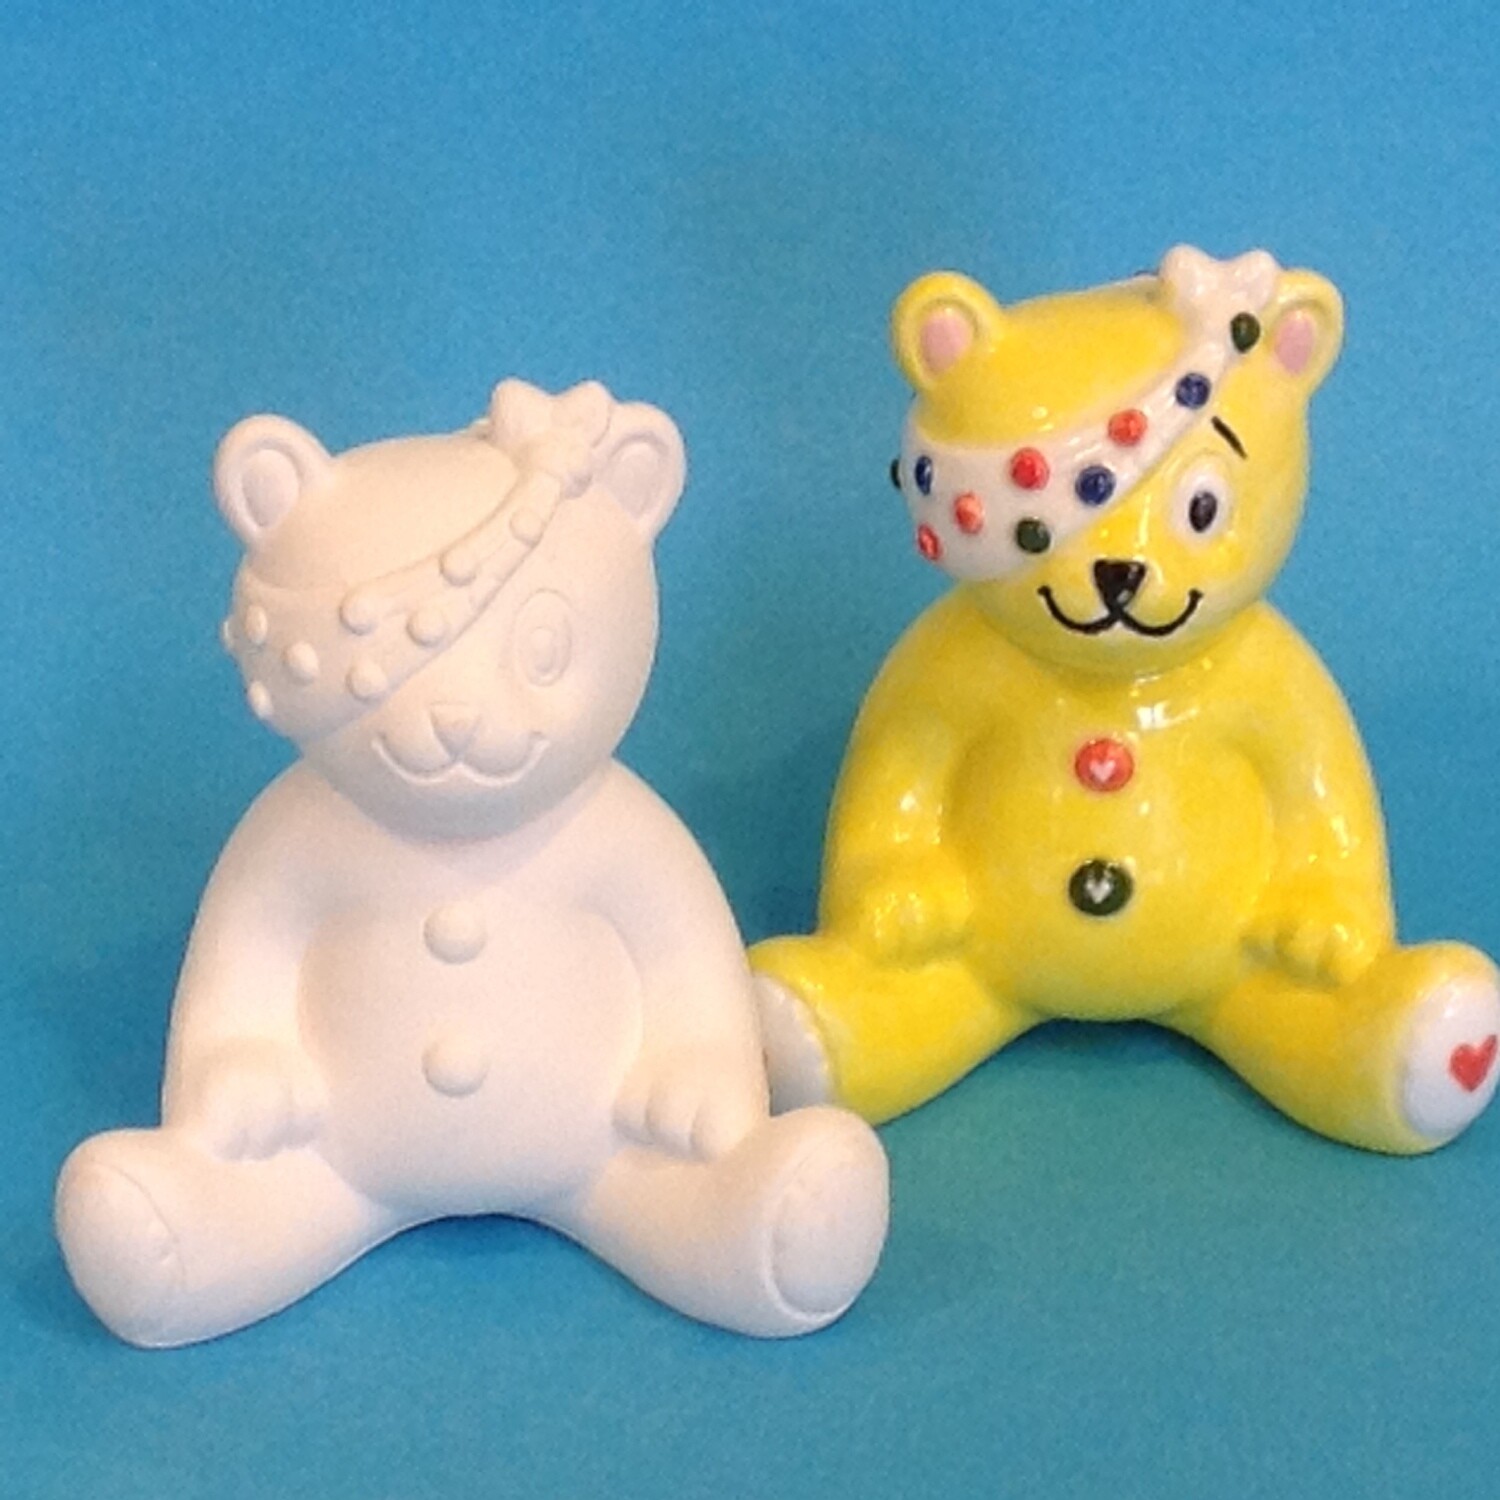 Pudsey (£5 to Children in Need)